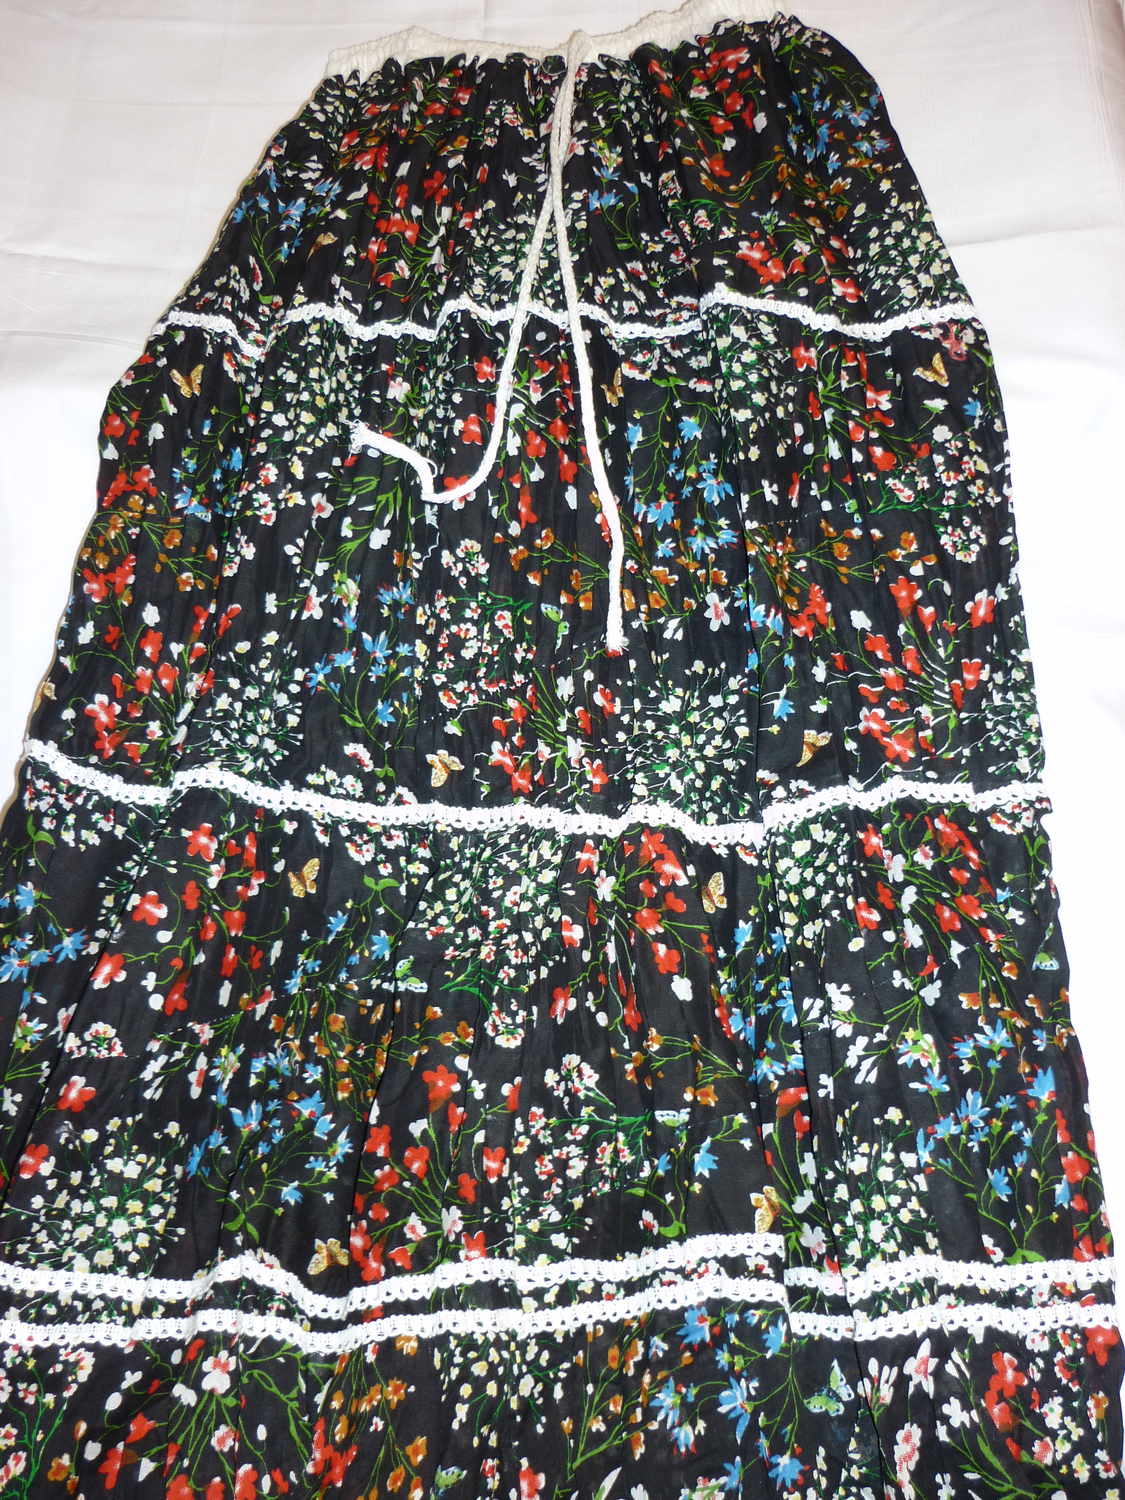 INDIAN BEAUTIFUL FLORAL PRINTED SKIRT IN 100% VISCOSE FOR LONG LADIES ll LOWEST PRICE GUARANTEED IIFREE(POSTNORD) DELIVERY ll DON'T MISS THIS CHANCE-DISCOUNT 25%- ART. NO. 35571986